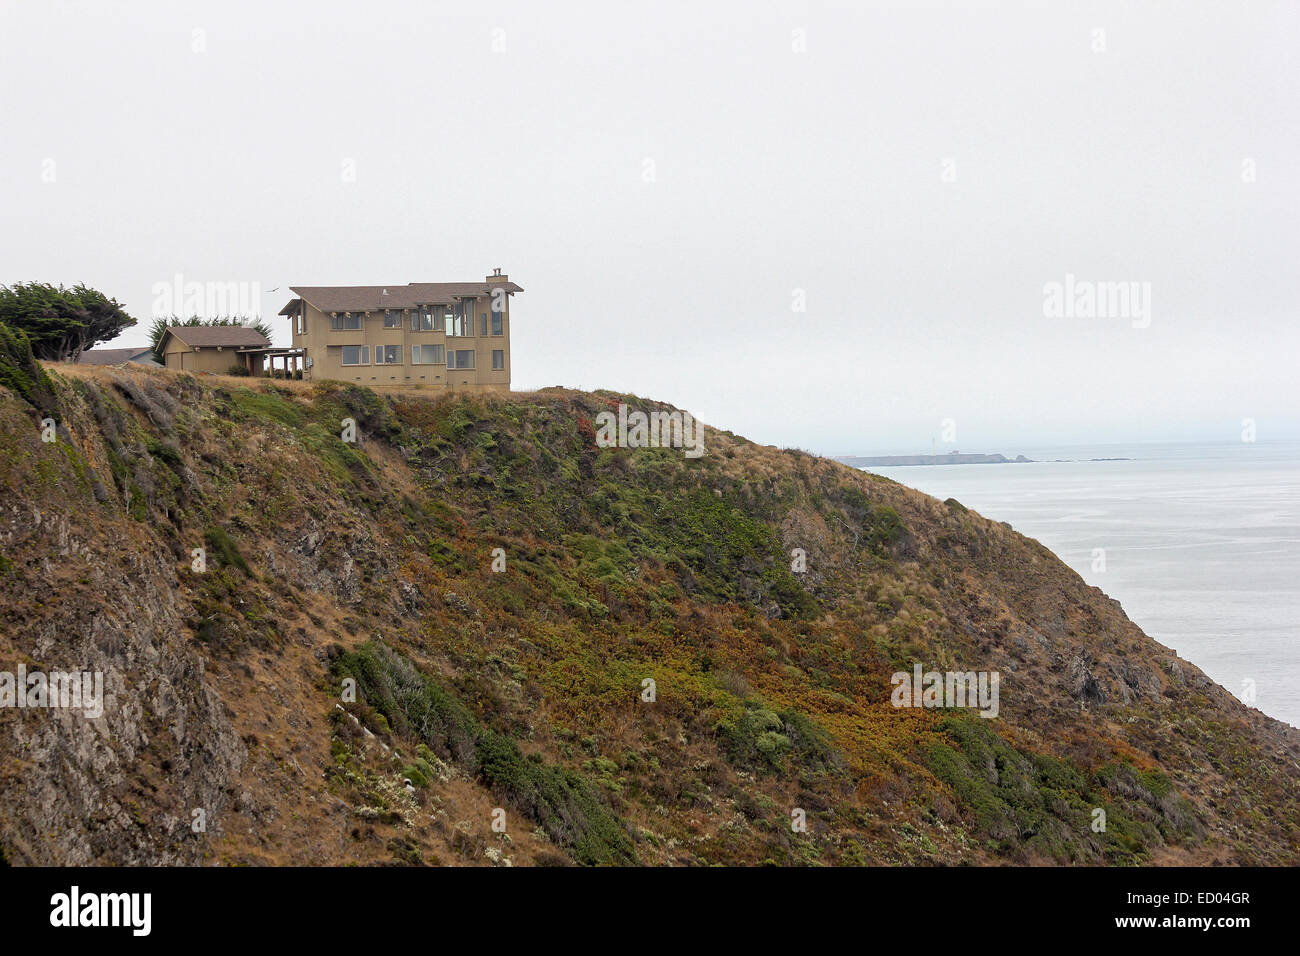 A large home on a cliff overlooks the Pacific Ocean. Mendocino County, California Stock Photo